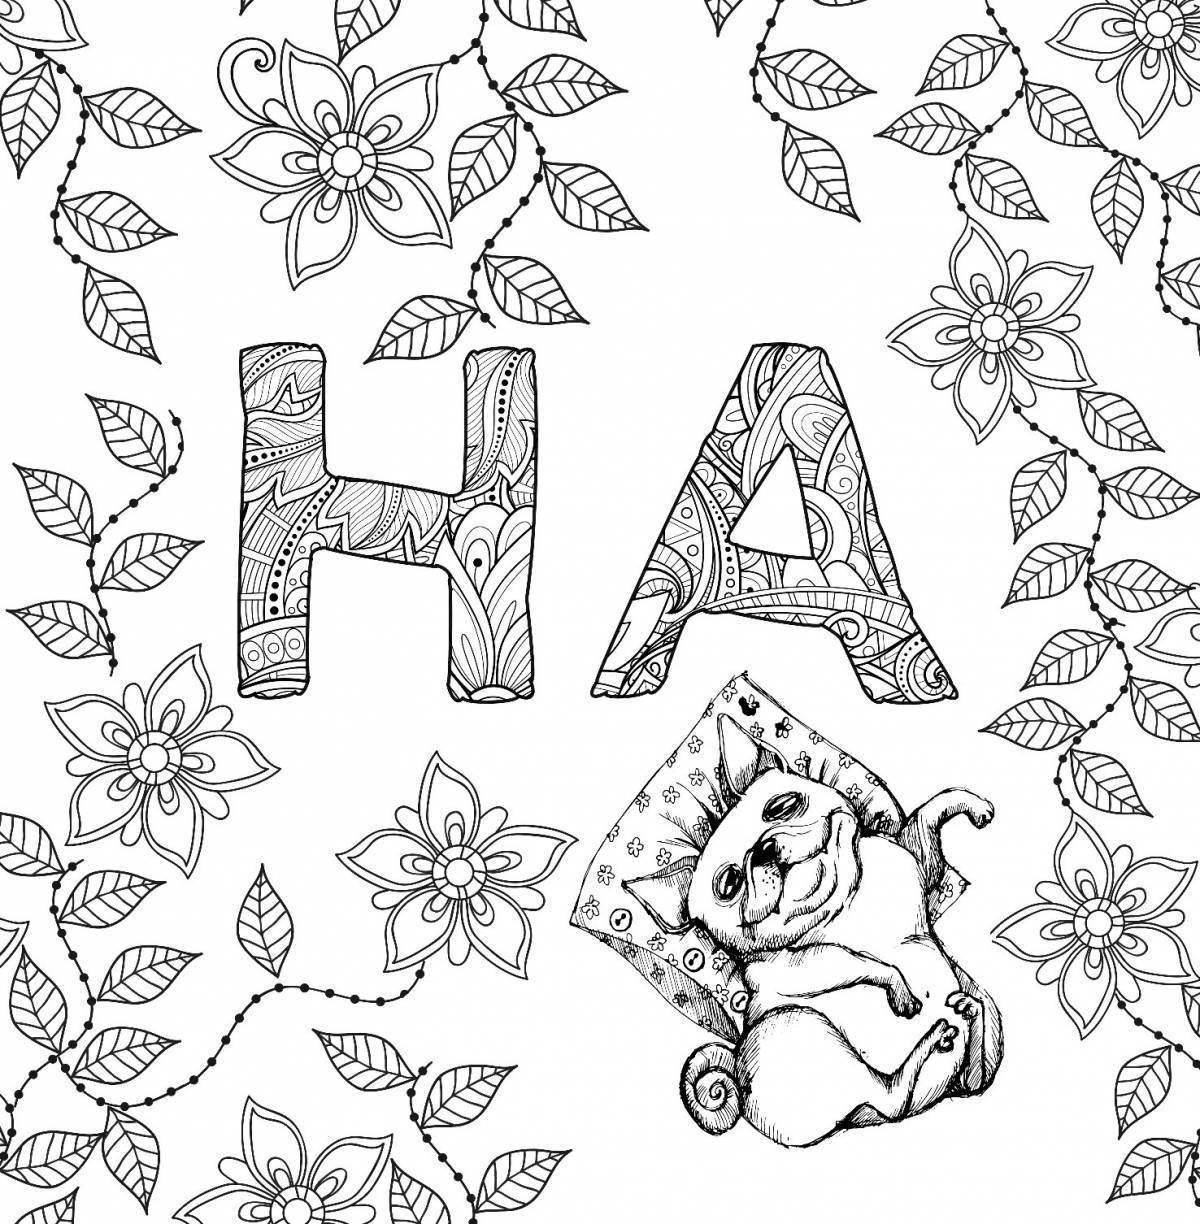 Joyful send all to coloring page